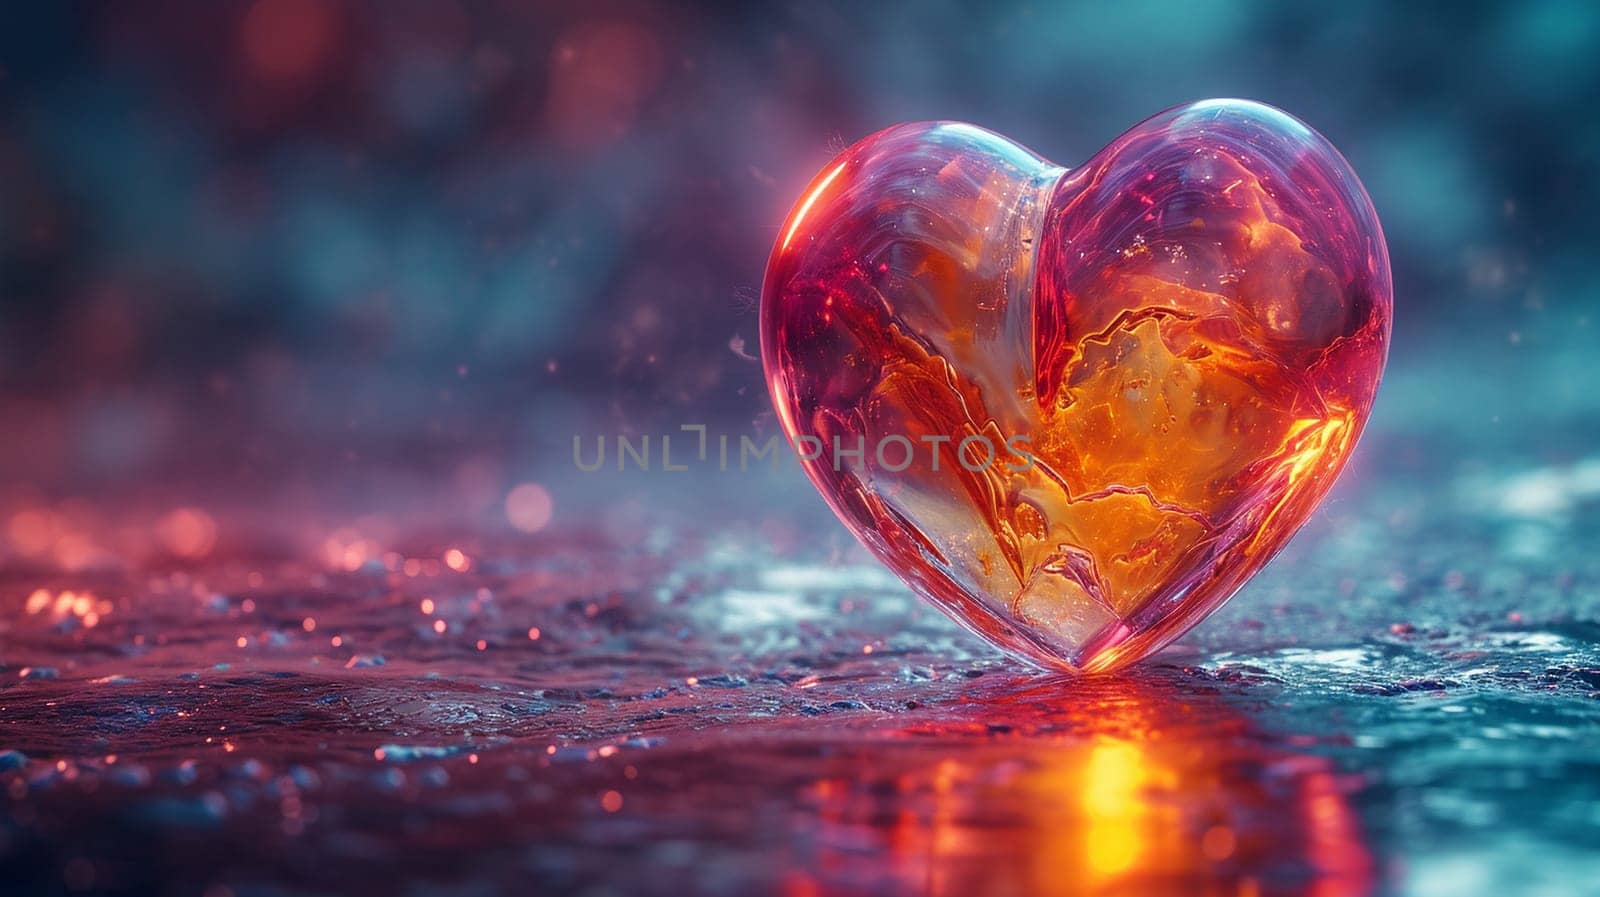 A beautiful image of a heart on a colorful background by NeuroSky